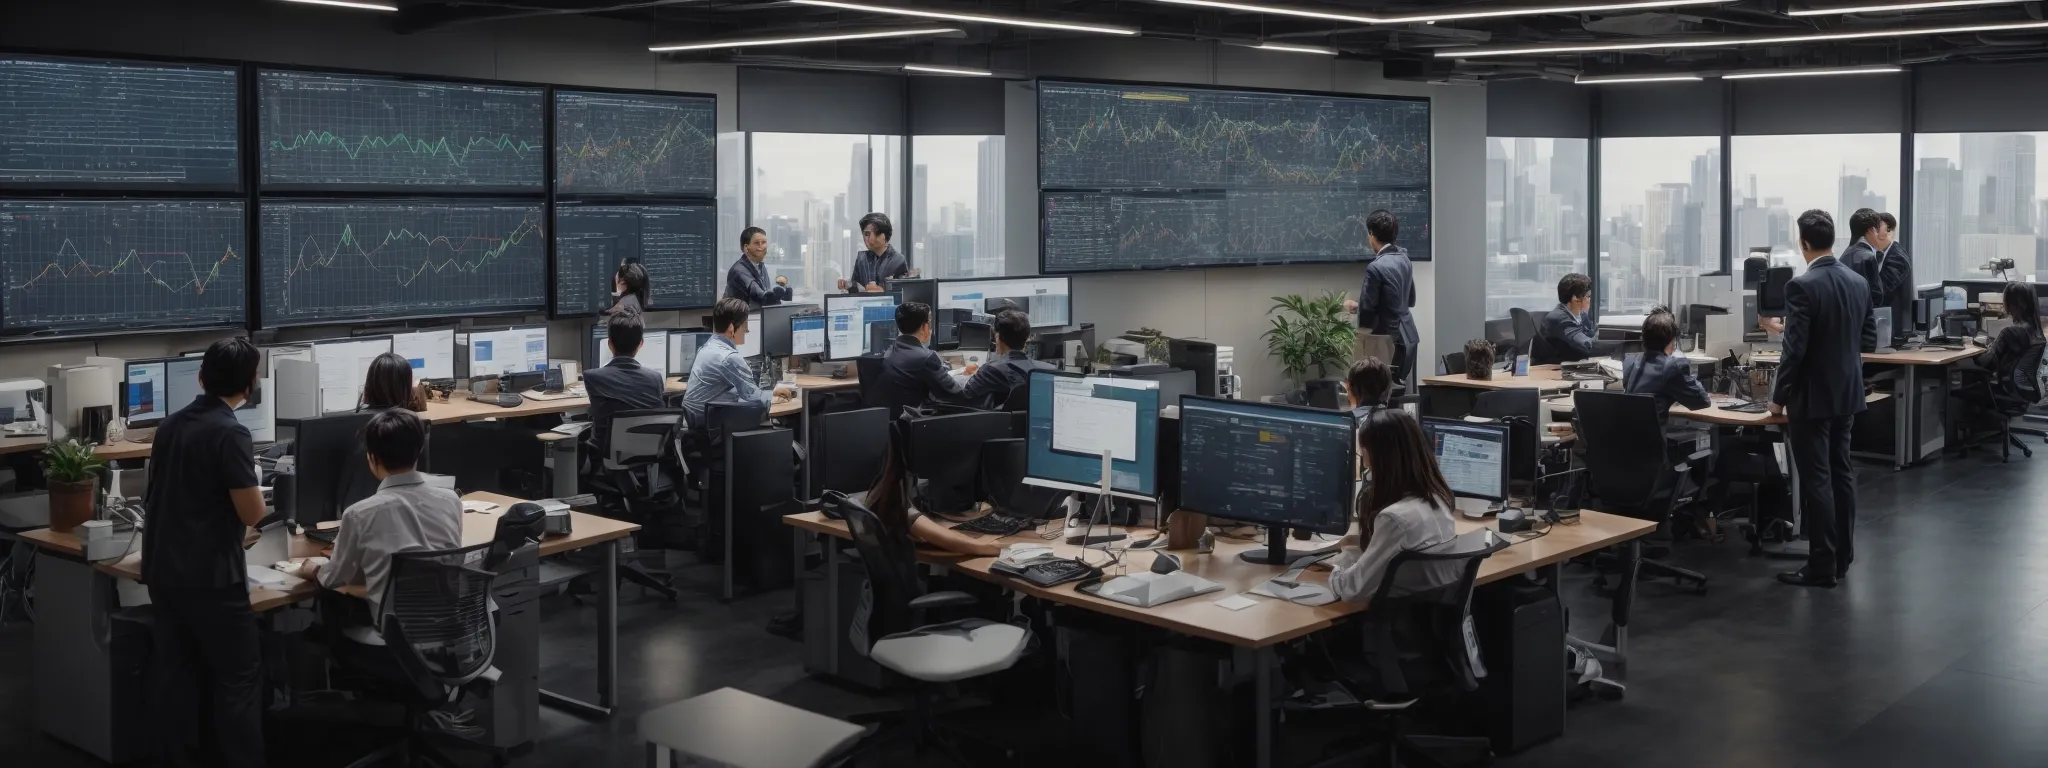 a bustling modern office with a team of tech professionals surrounding a large screen displaying a complex flowchart of website traffic patterns.